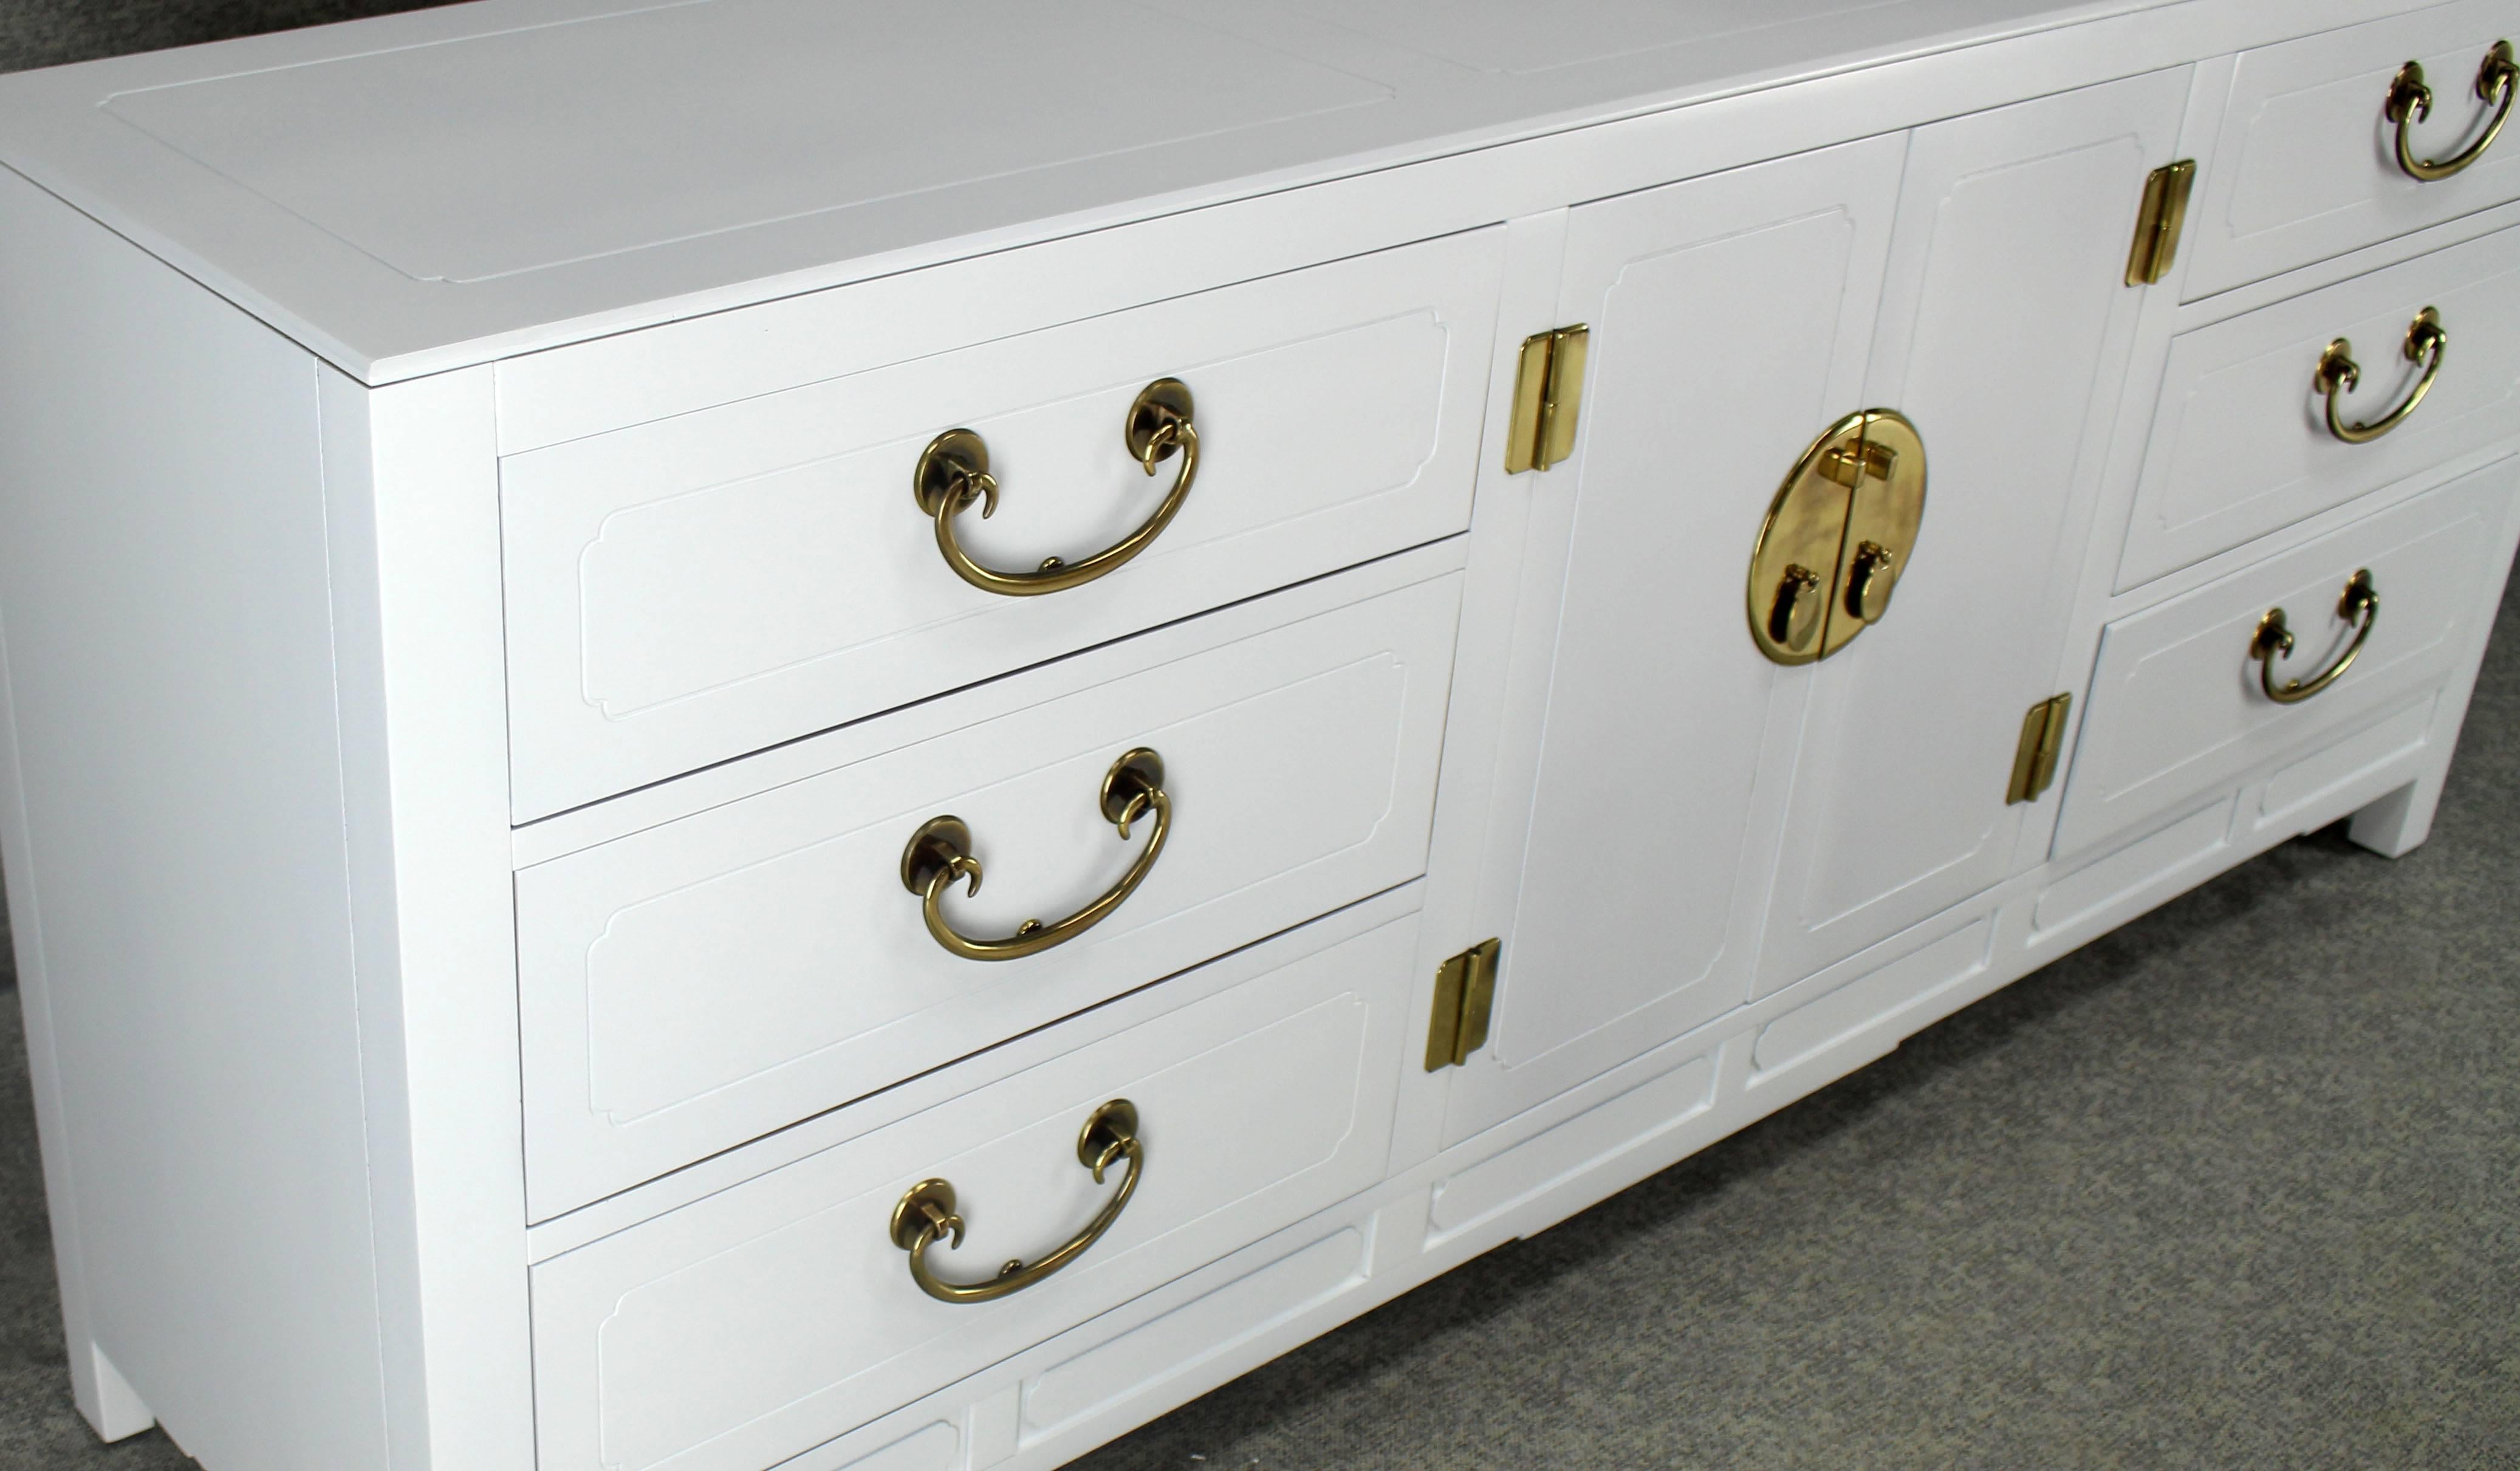 American Lacquer Brass Hardware Mid-Century Modern Long Credenza Dresser Nine Drawers For Sale